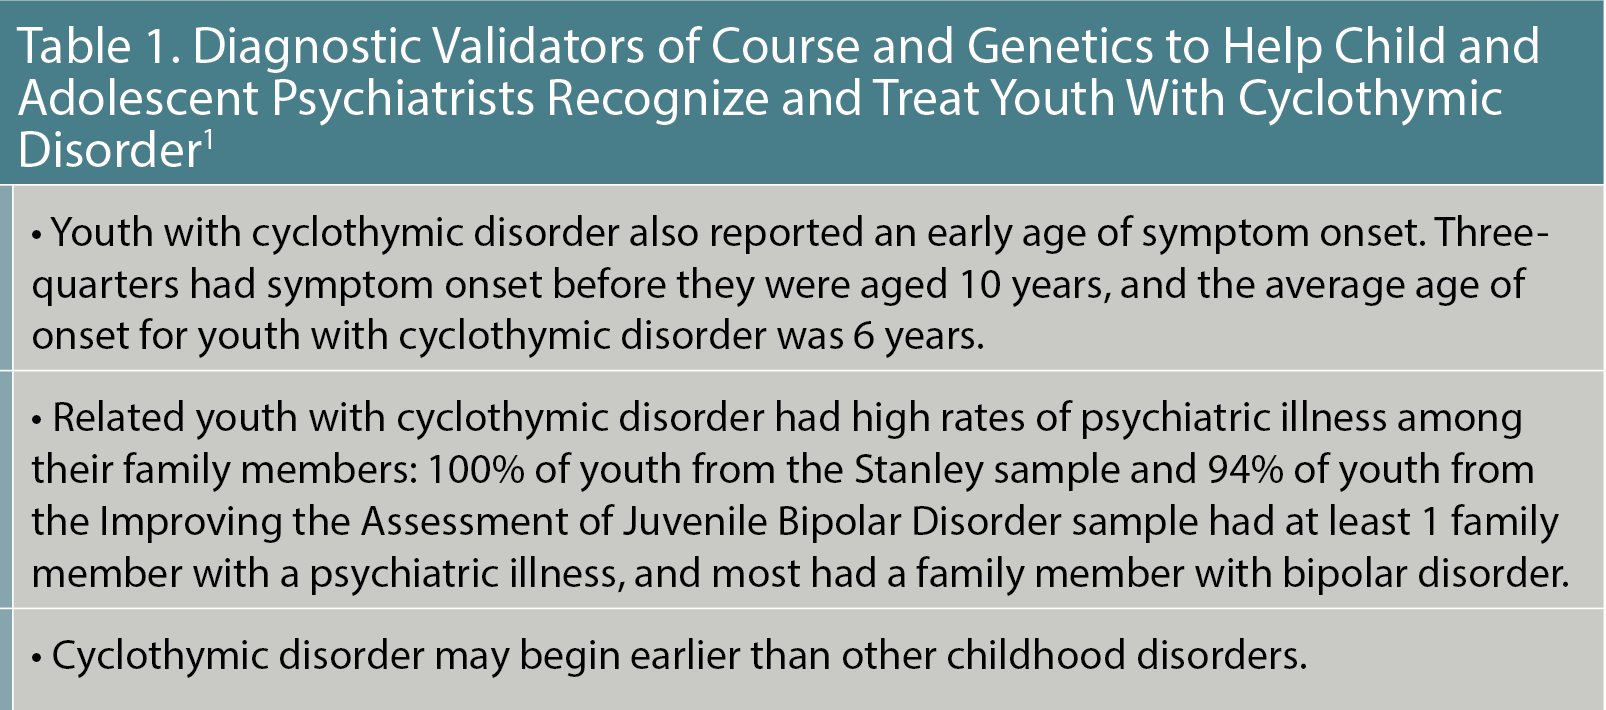 Table 1. Diagnostic Validators of Course and Genetics to Help Child and Adolescent Psychiatrists Recognize and Treat Youth With Cyclothymic Disorder